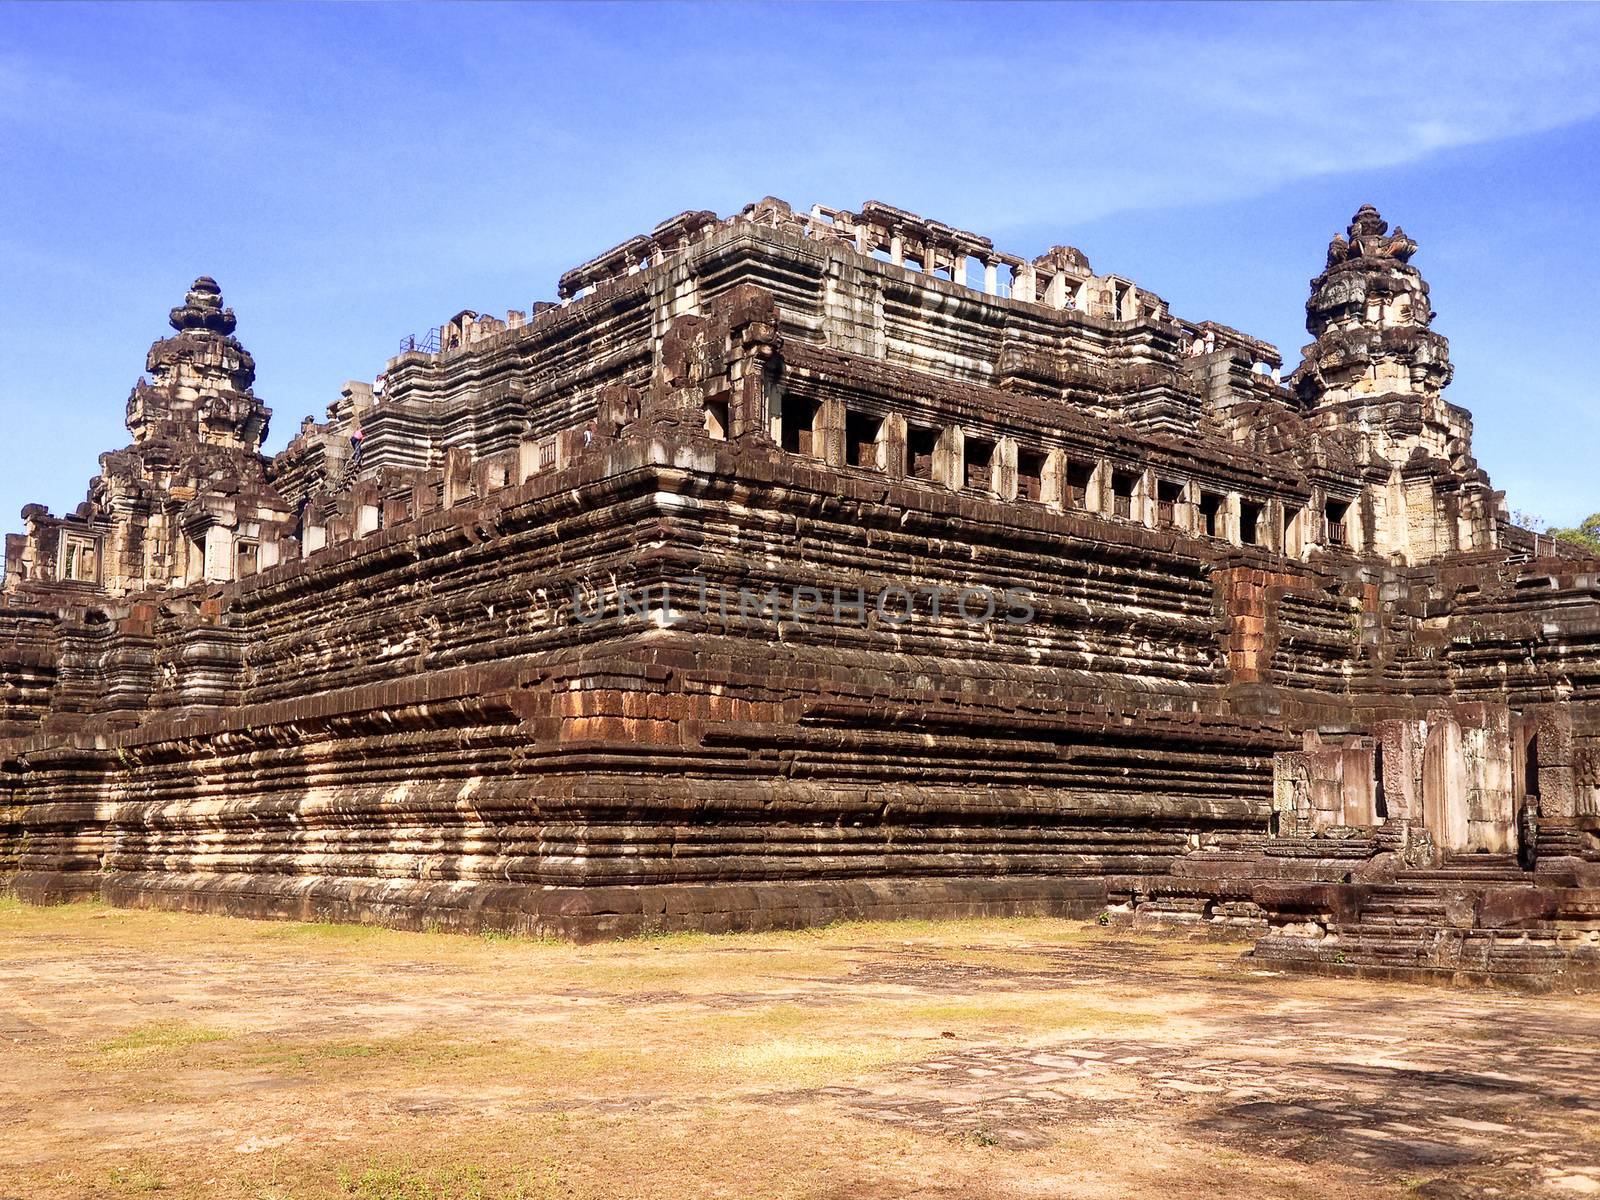 Baphuon temple in Siem Reap, Cambodia. The Baphuon is a temple a by orsor